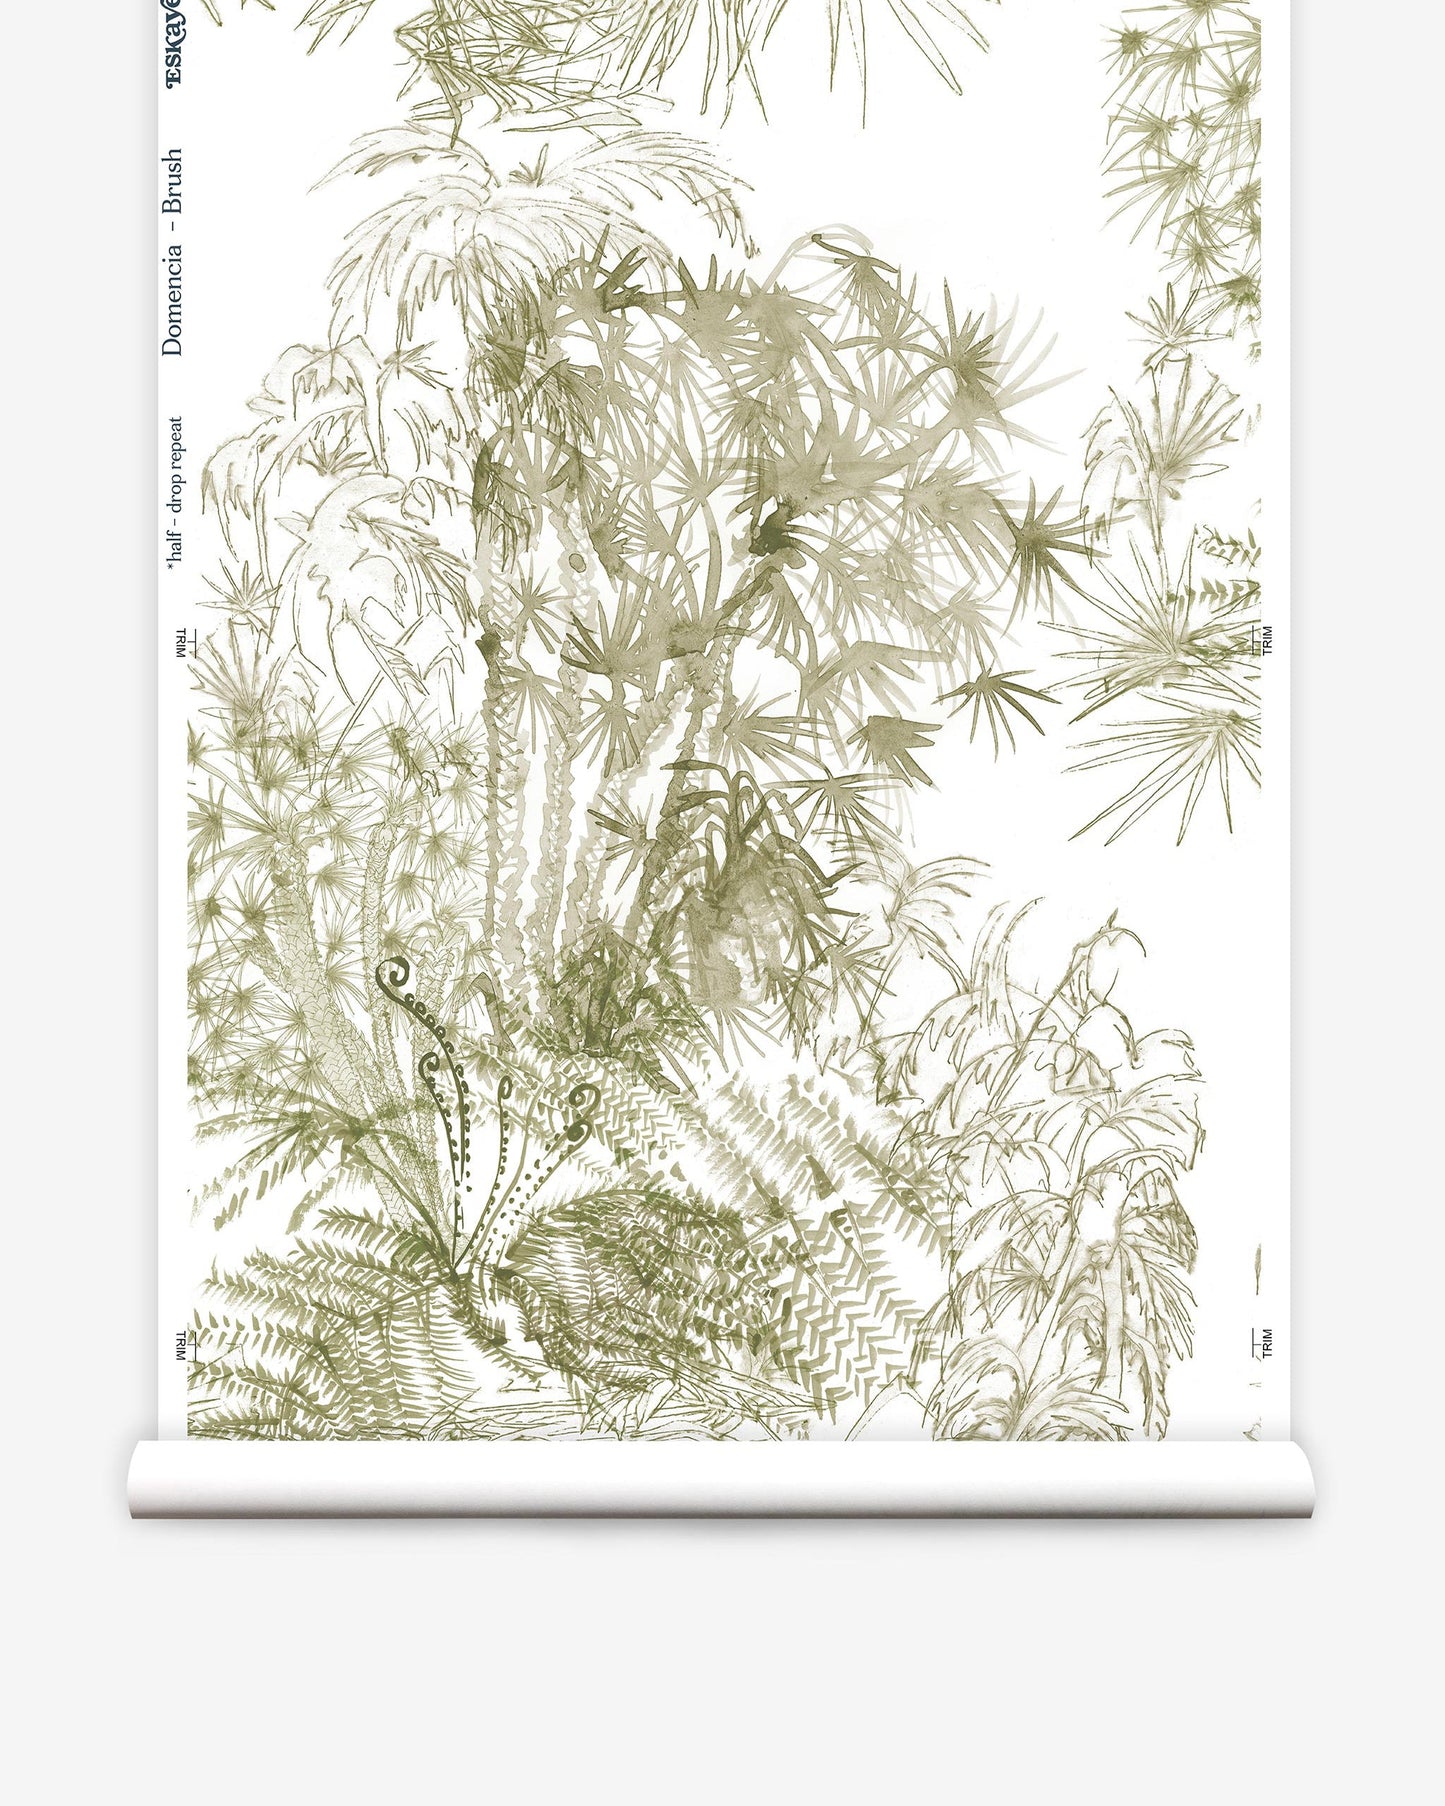 A roll of Domenica Wallpaper with tropical plants from the Salentu Collection